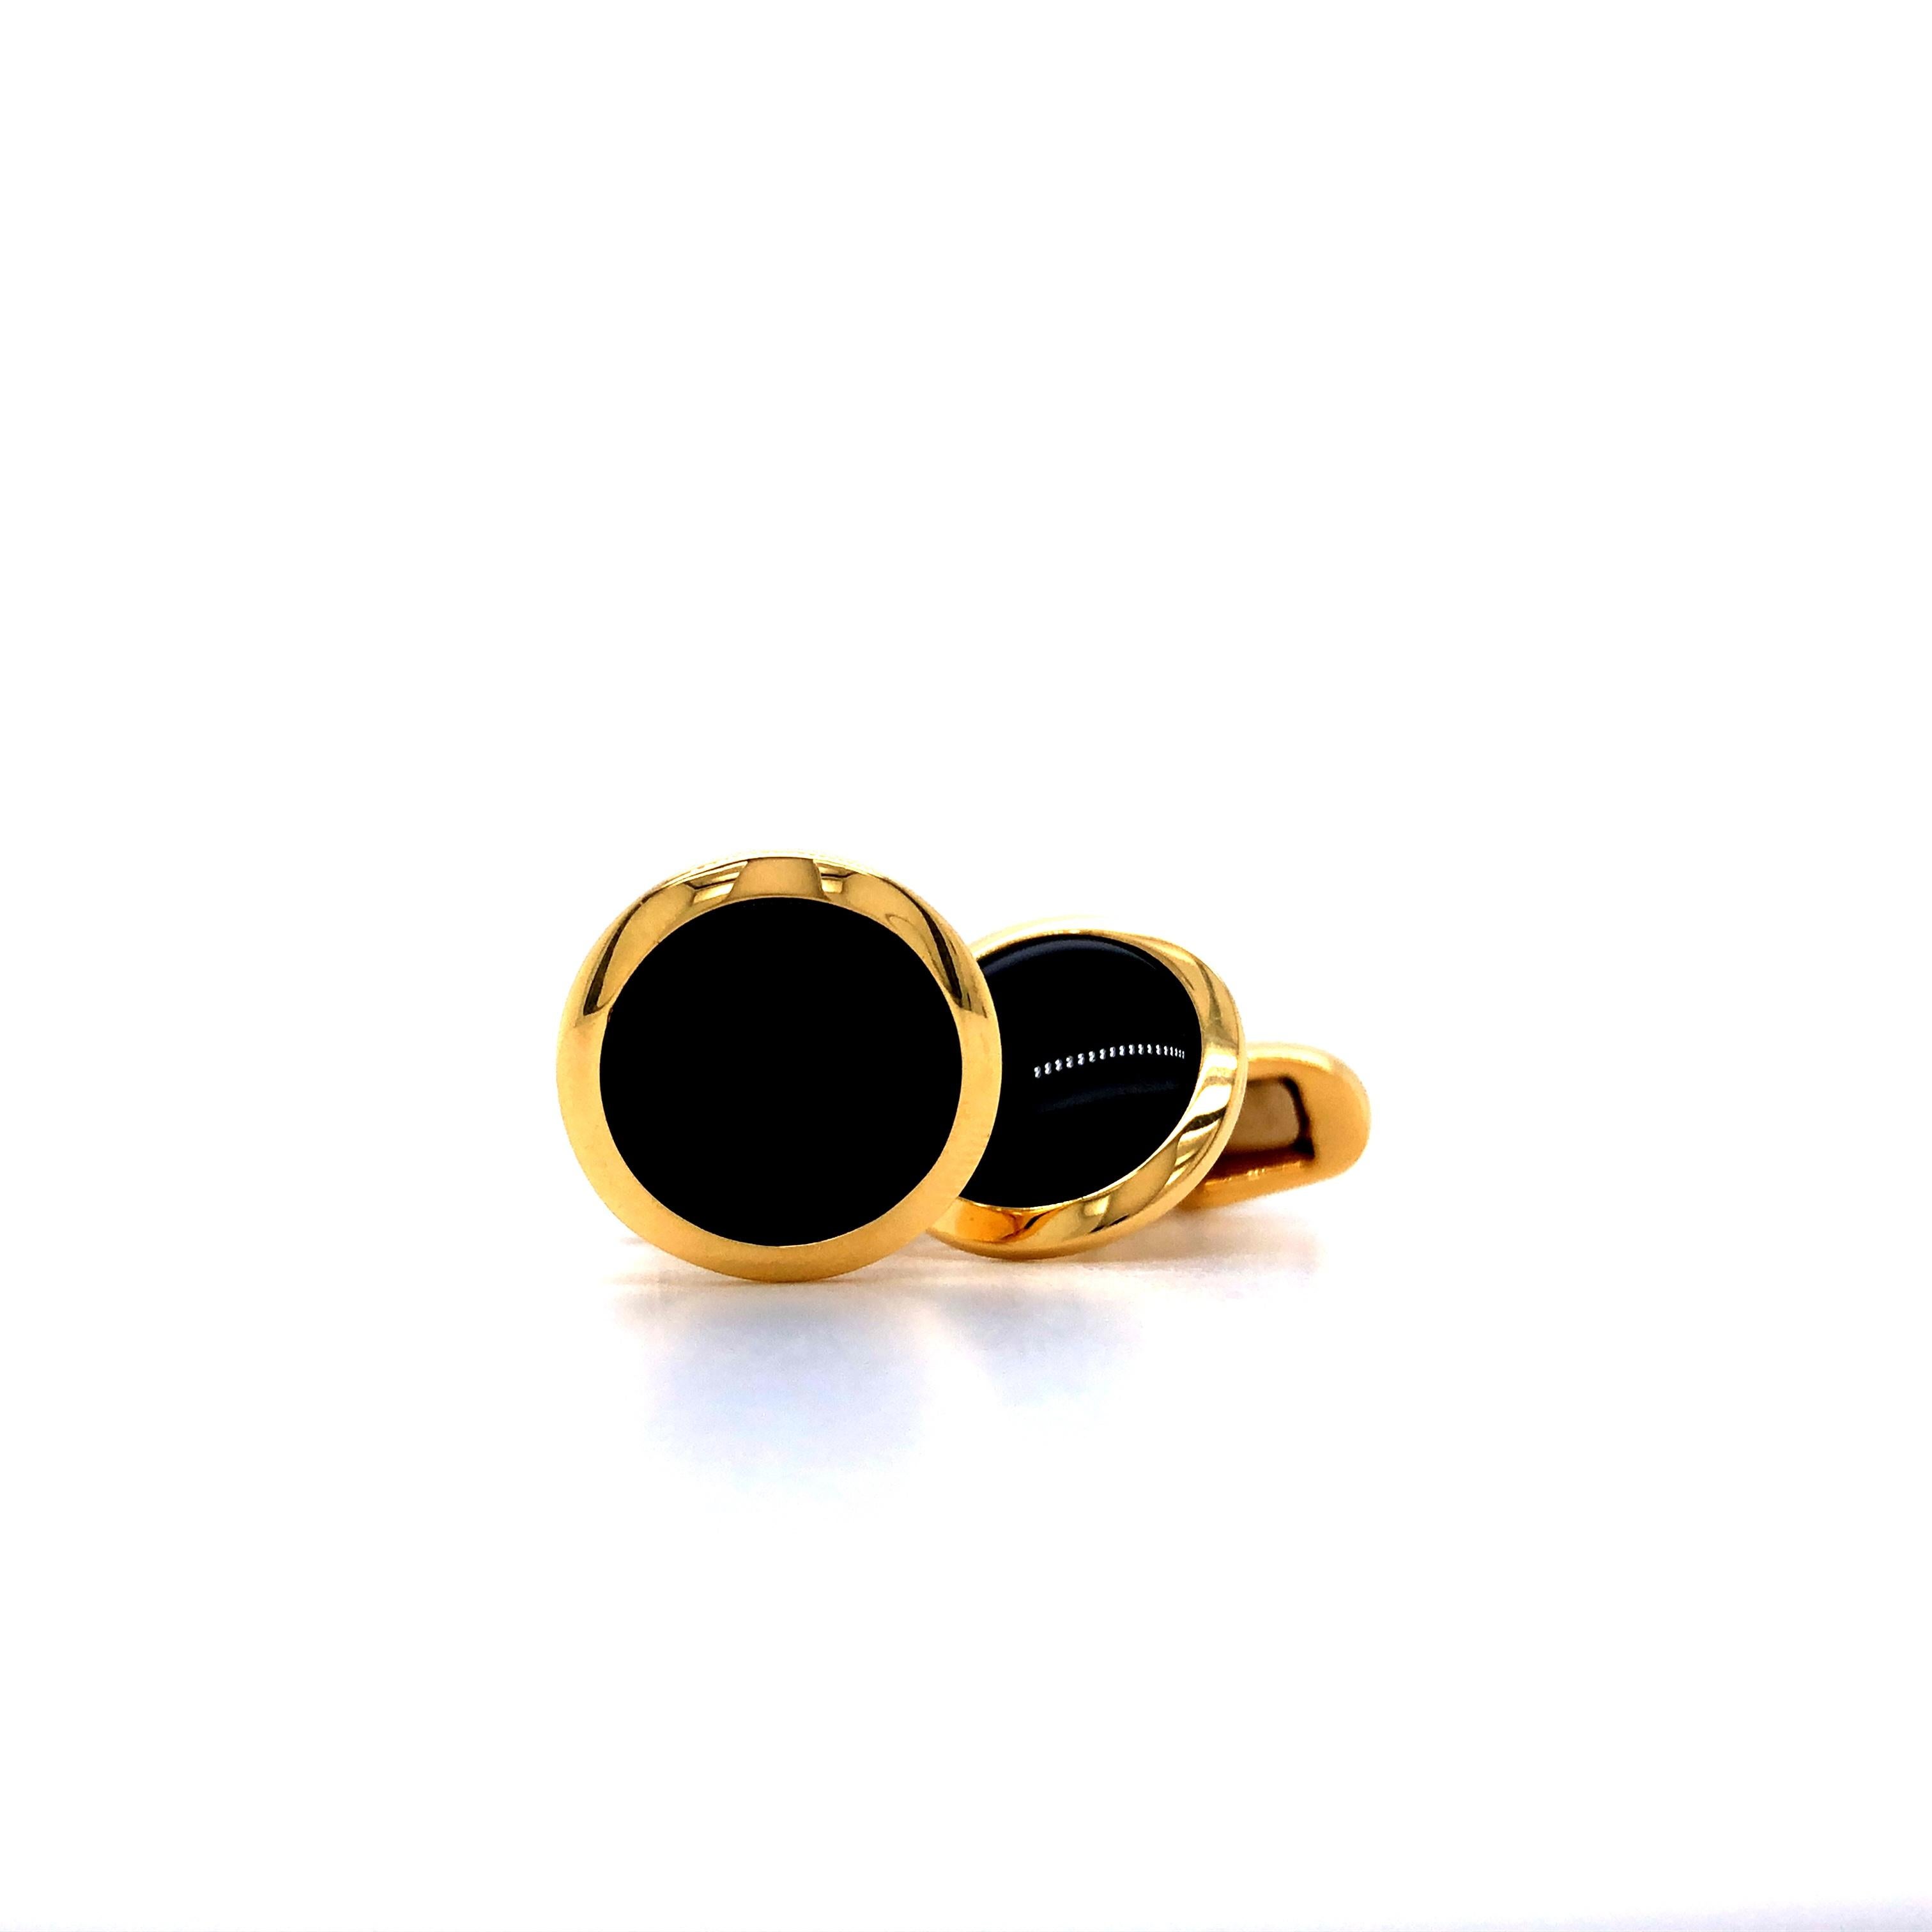 Round Cufflinks with Domed Bezel, 18k Yellow Gold, Onyx Inlays For Sale 2